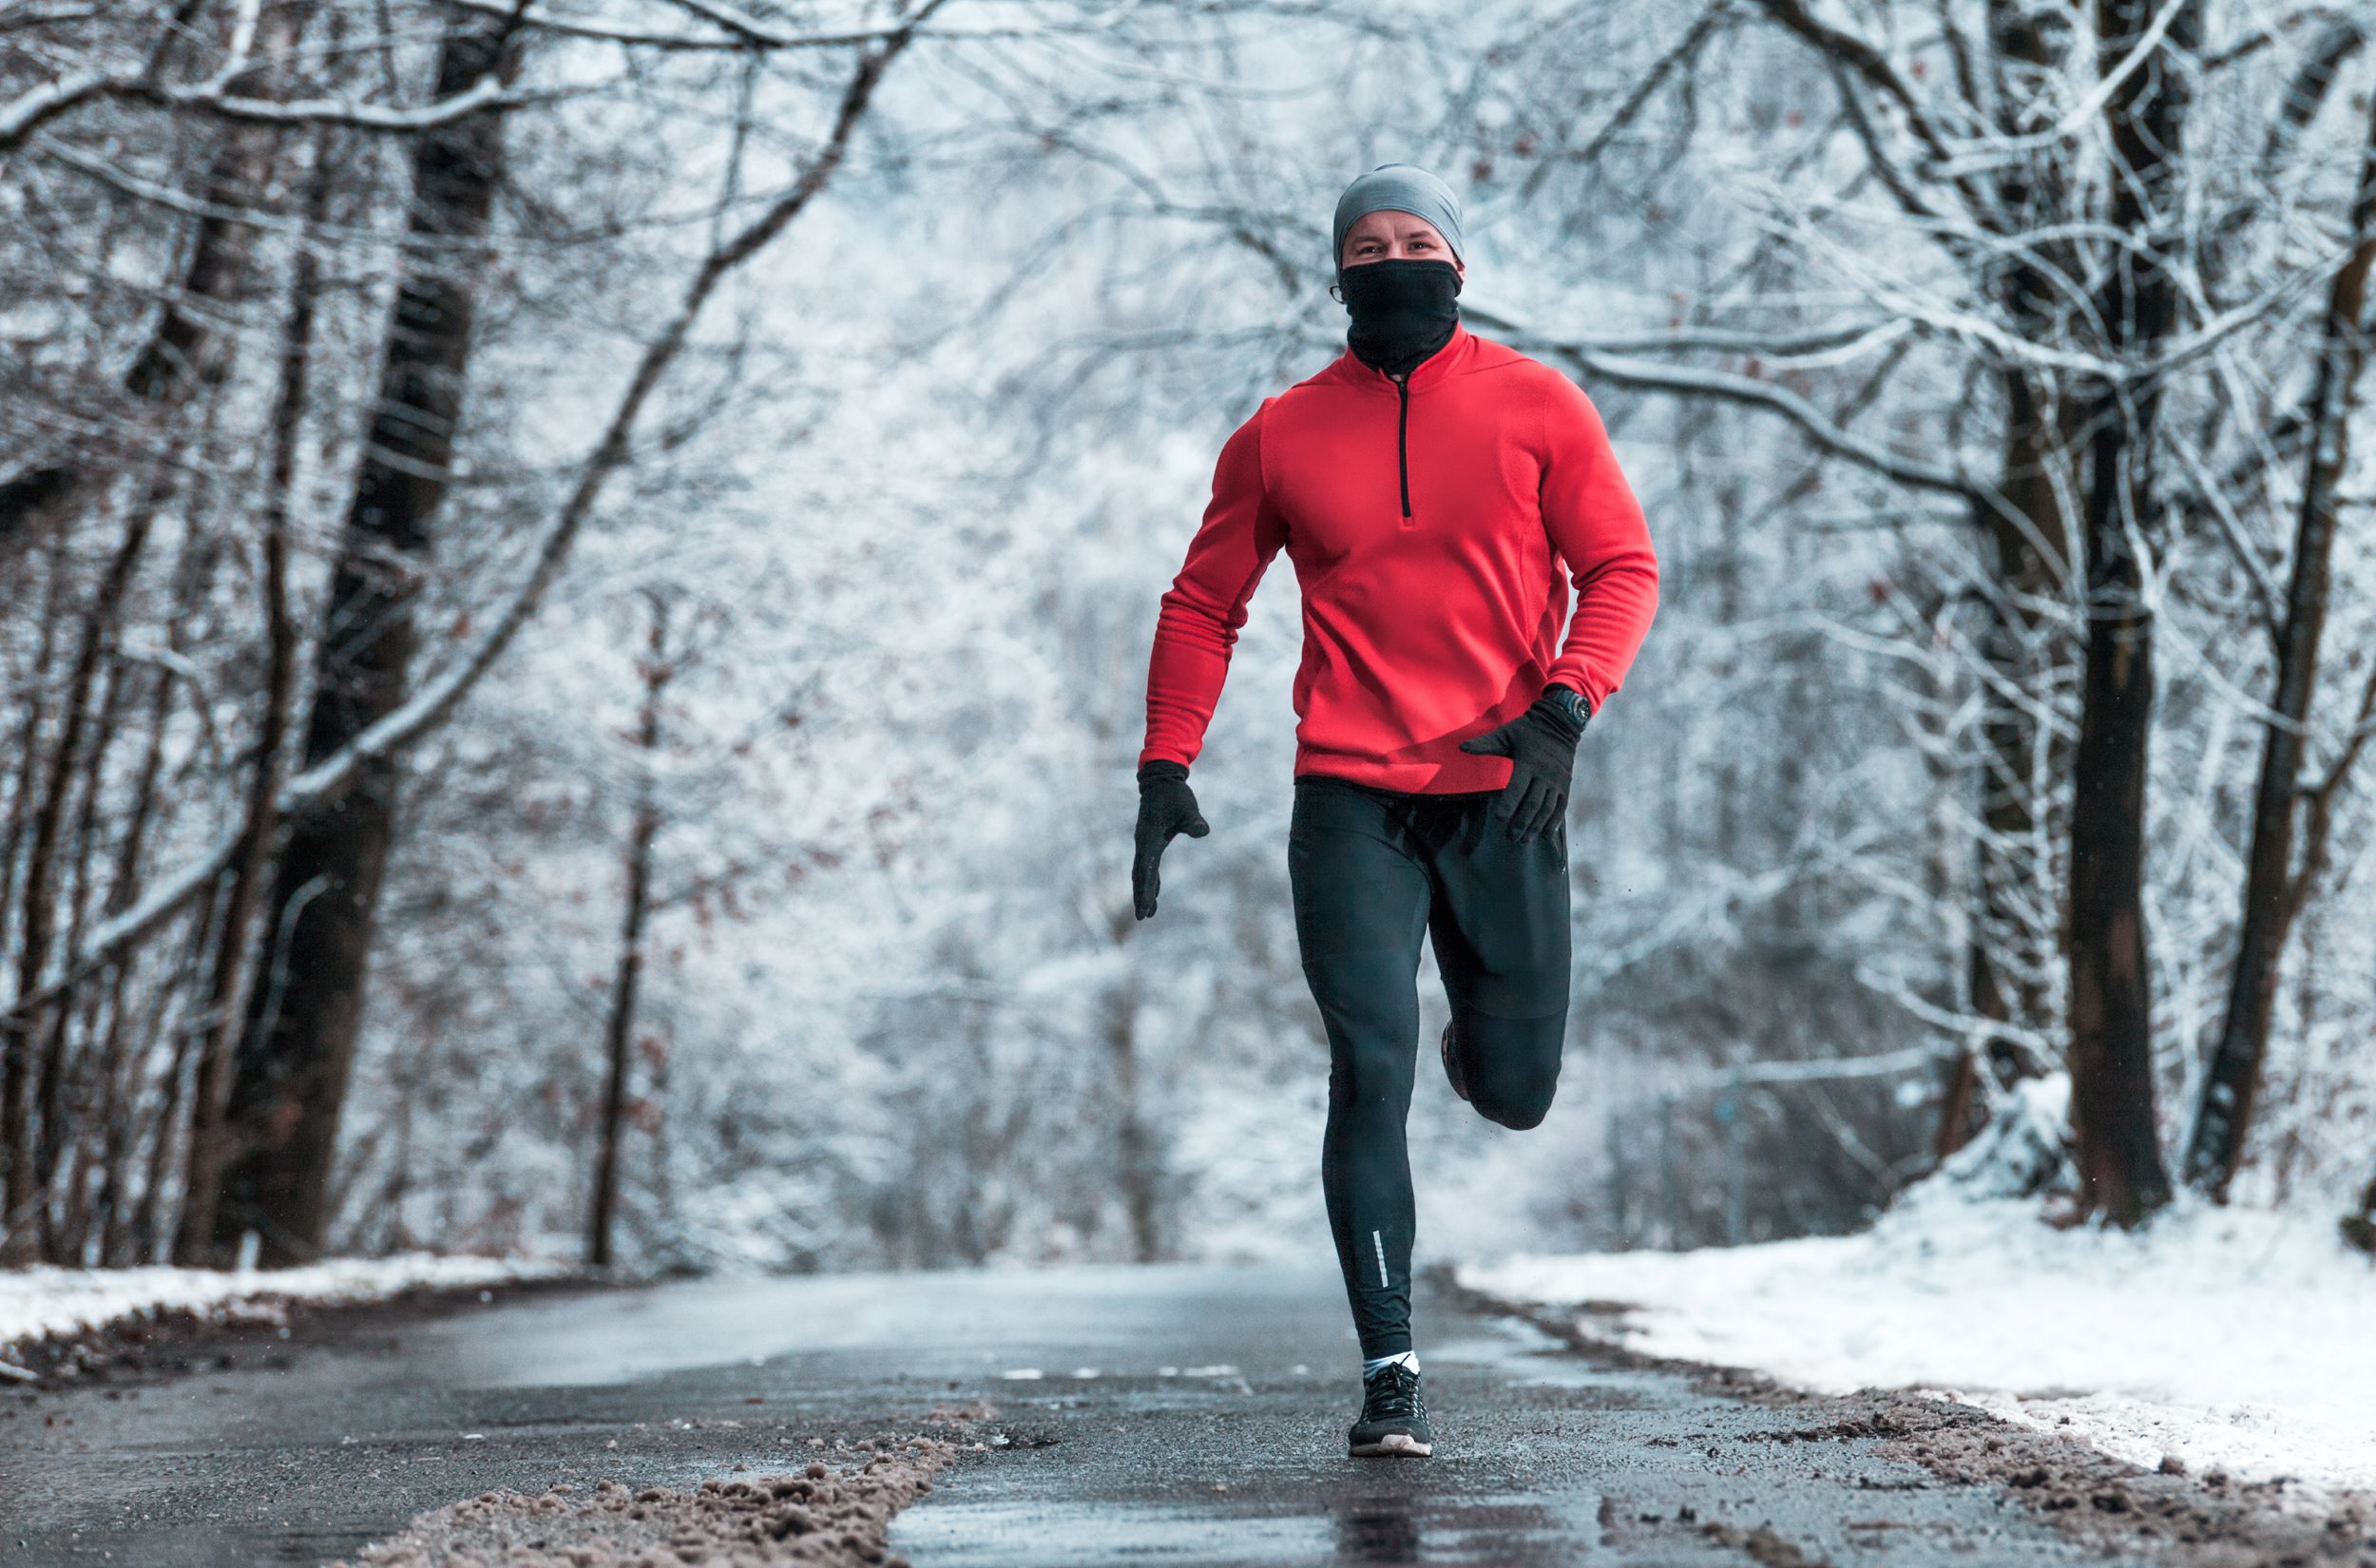 A man in a red jacket is running in the snow.